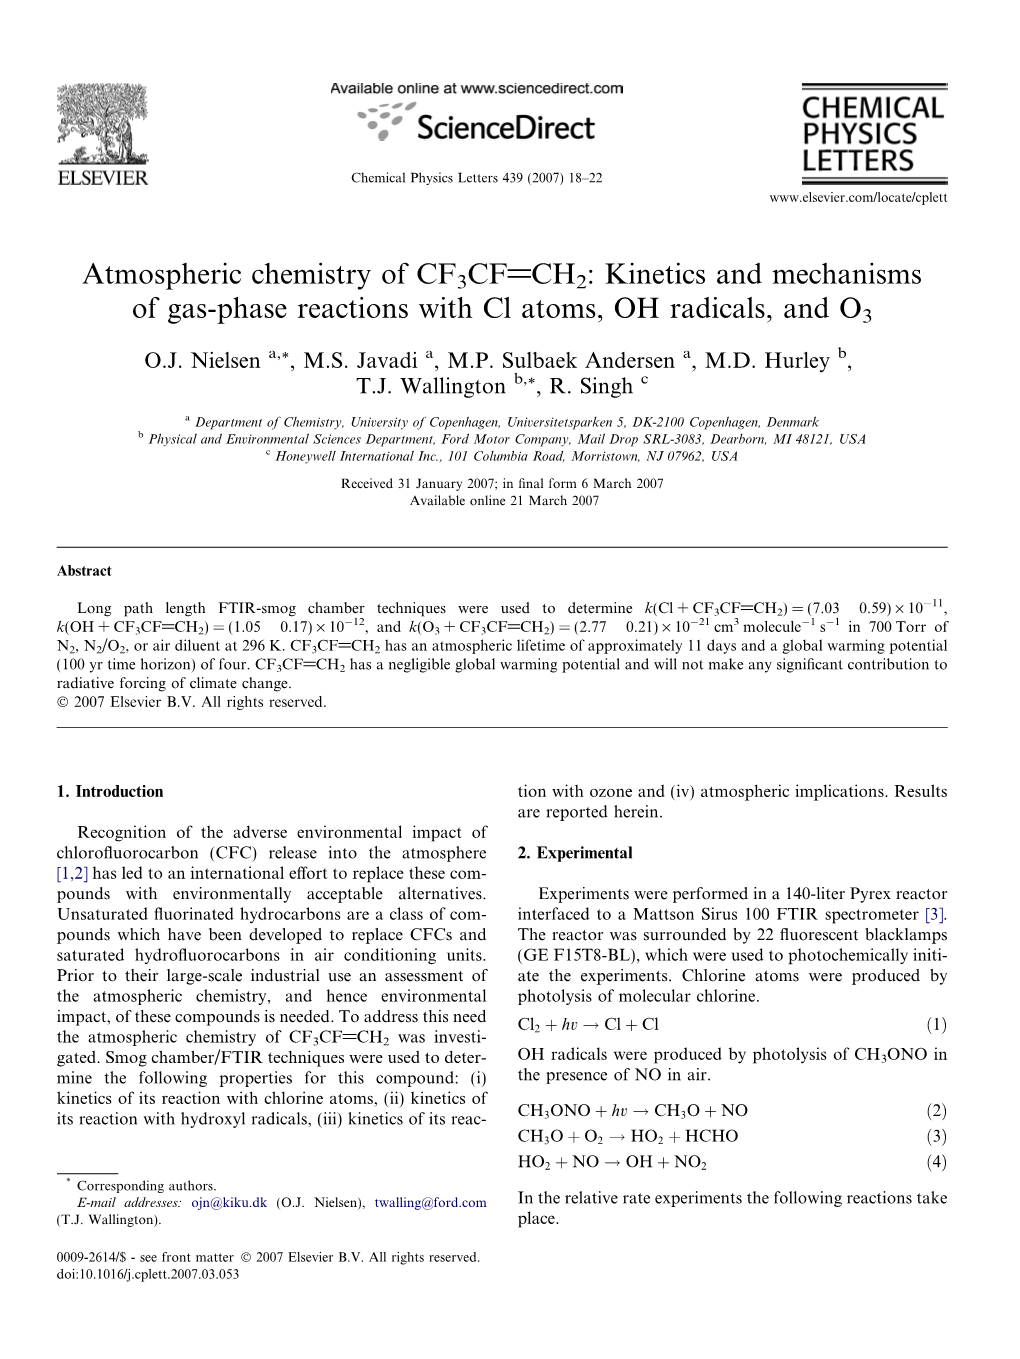 Atmospheric Chemistry of CF3CF@CH2: Kinetics and Mechanisms of Gas-Phase Reactions with Cl Atoms, OH Radicals, and O3